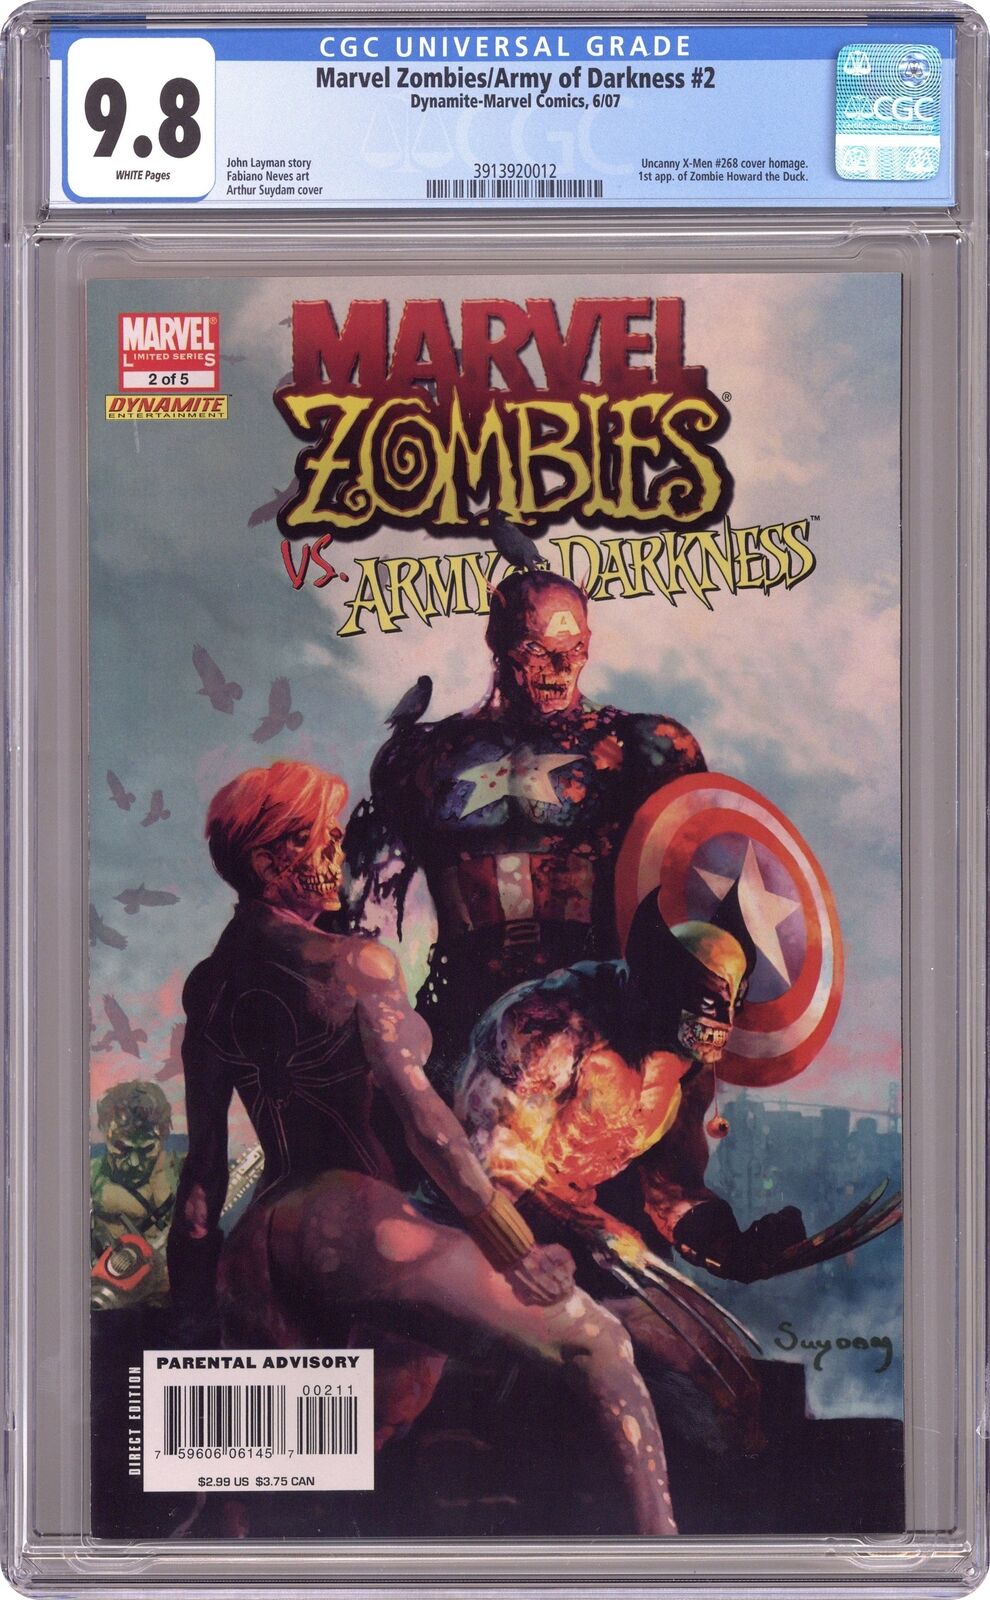 Marvel Zombies Army of Darkness #2 CGC 9.8 2007 3913920012